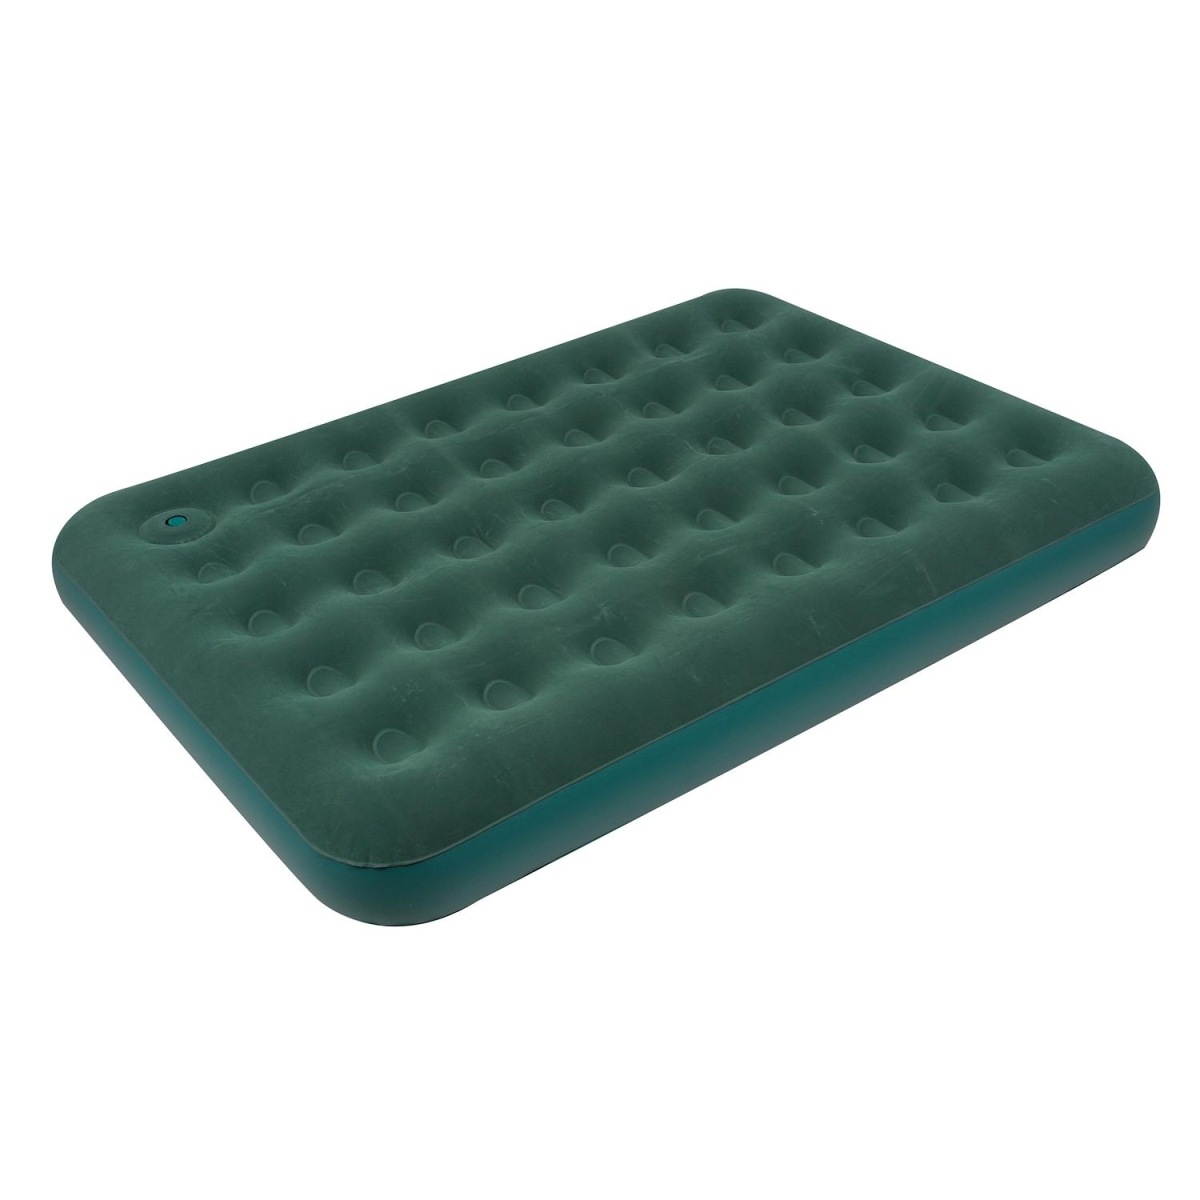 32602001 75 In. Green Double Sized Inflatable Flocked Air Bed With Built-in Foot Pump